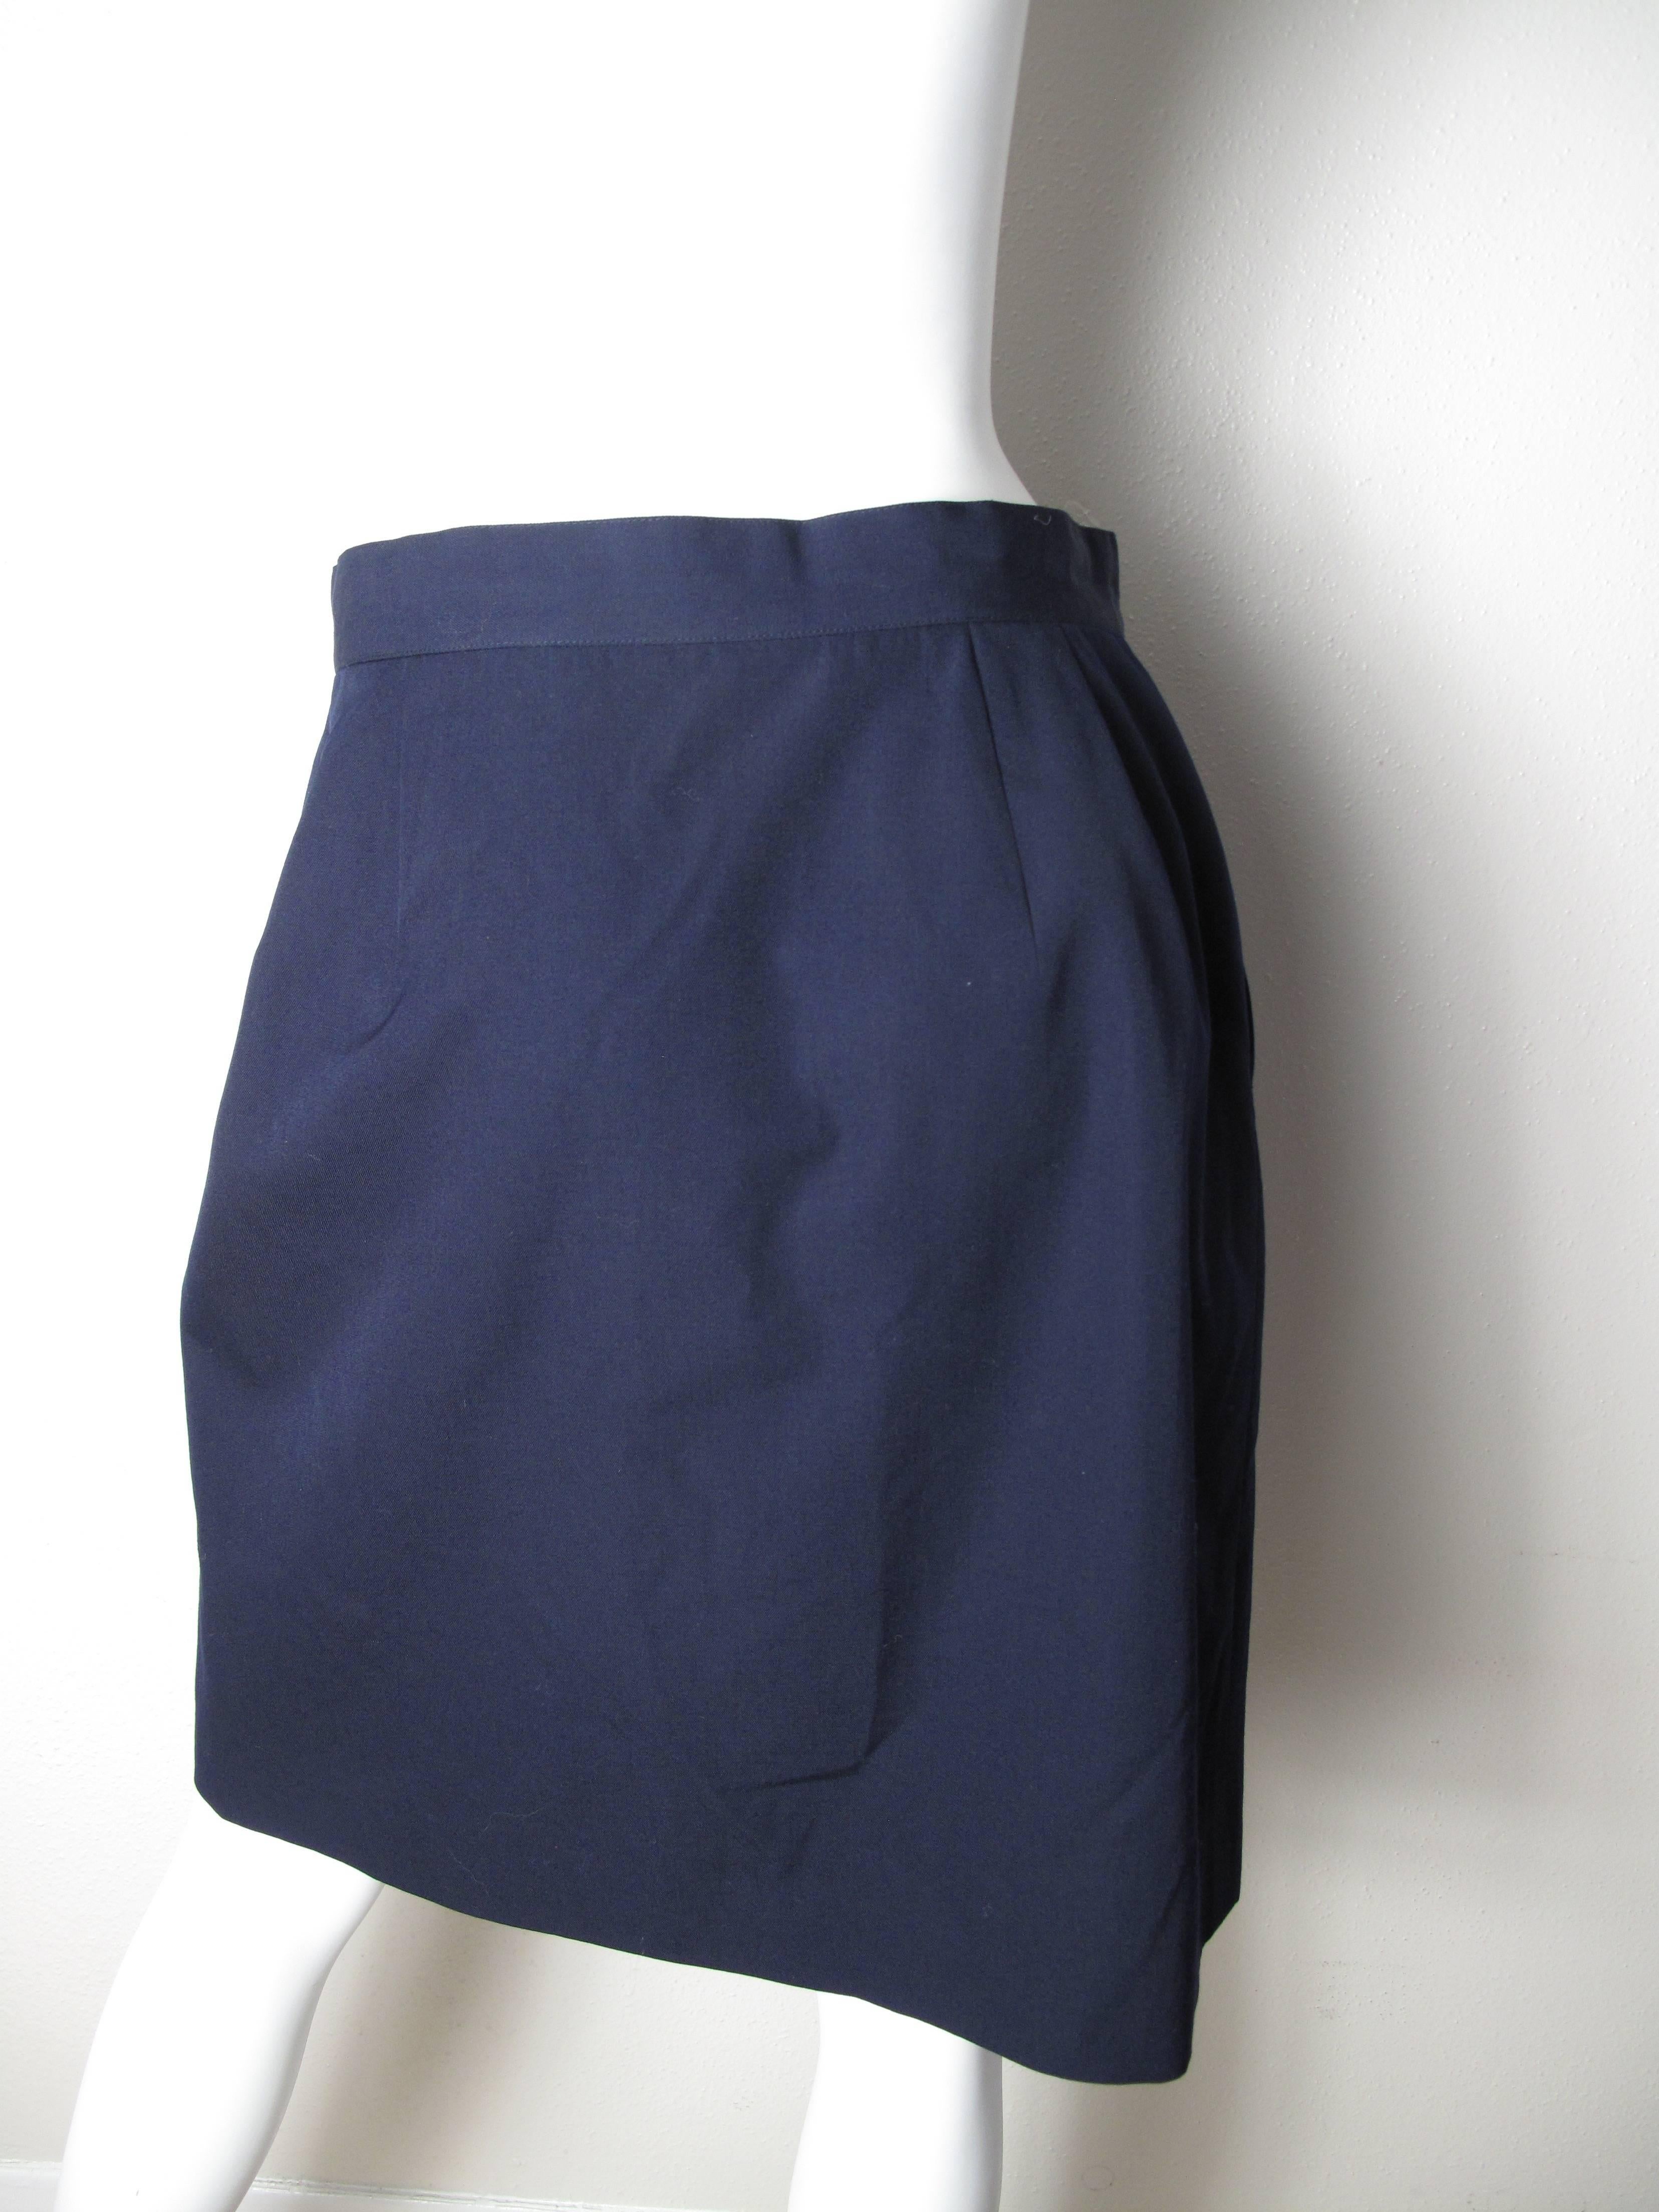 Issey Miyake navy wool wrap skirt, one pocket.  Condition: Excellent. Size M

We accept returns for refund, please see our terms.  We offer free ground shipping within the US.  Please let us know if you have any questions. 